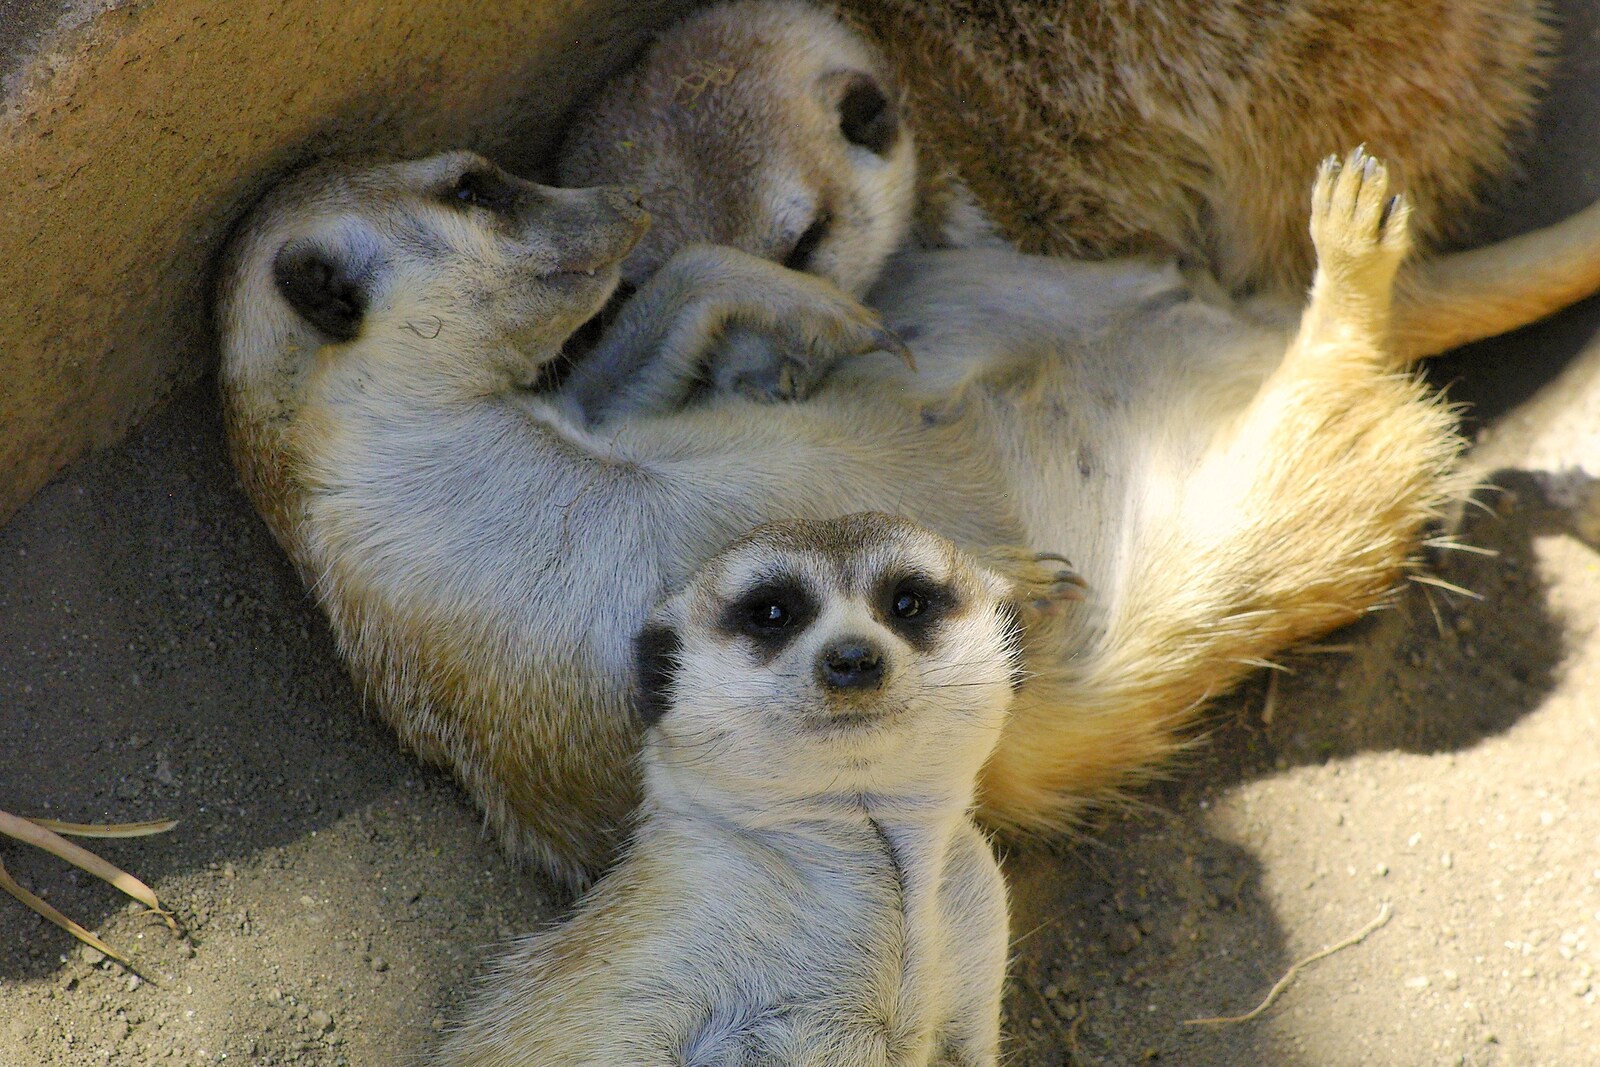 A family of meerkats from San Diego Seven: The Desert and the Dunes, Arizona and California, US - 22nd April